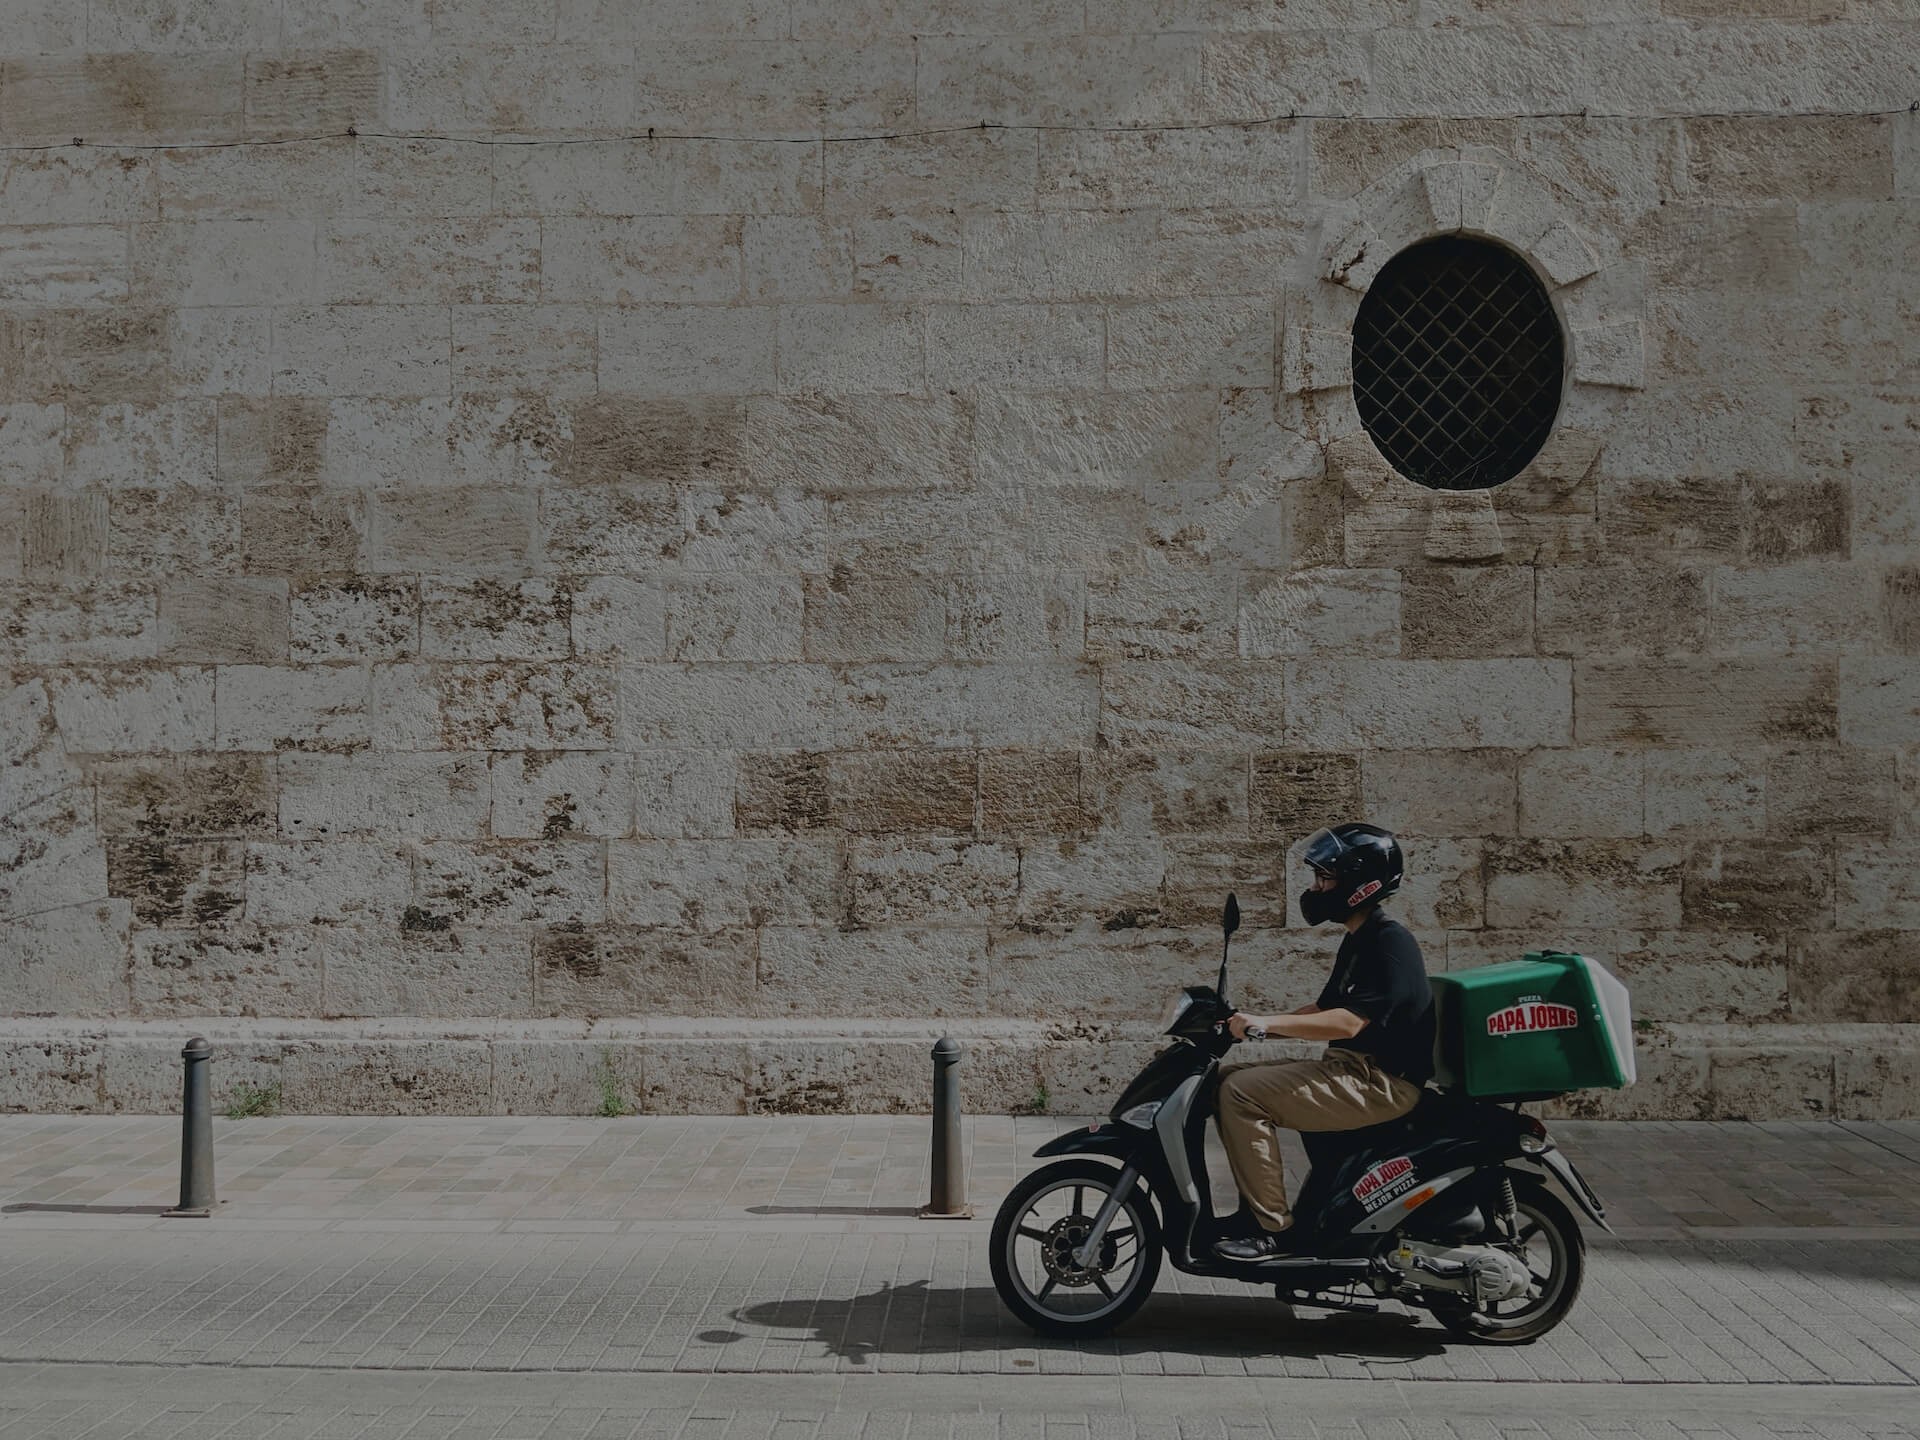 Background image for Habitat Logistics case study hero section, A delivery worker on a motorcycle seen from the side, carrying an order for a pizzeria